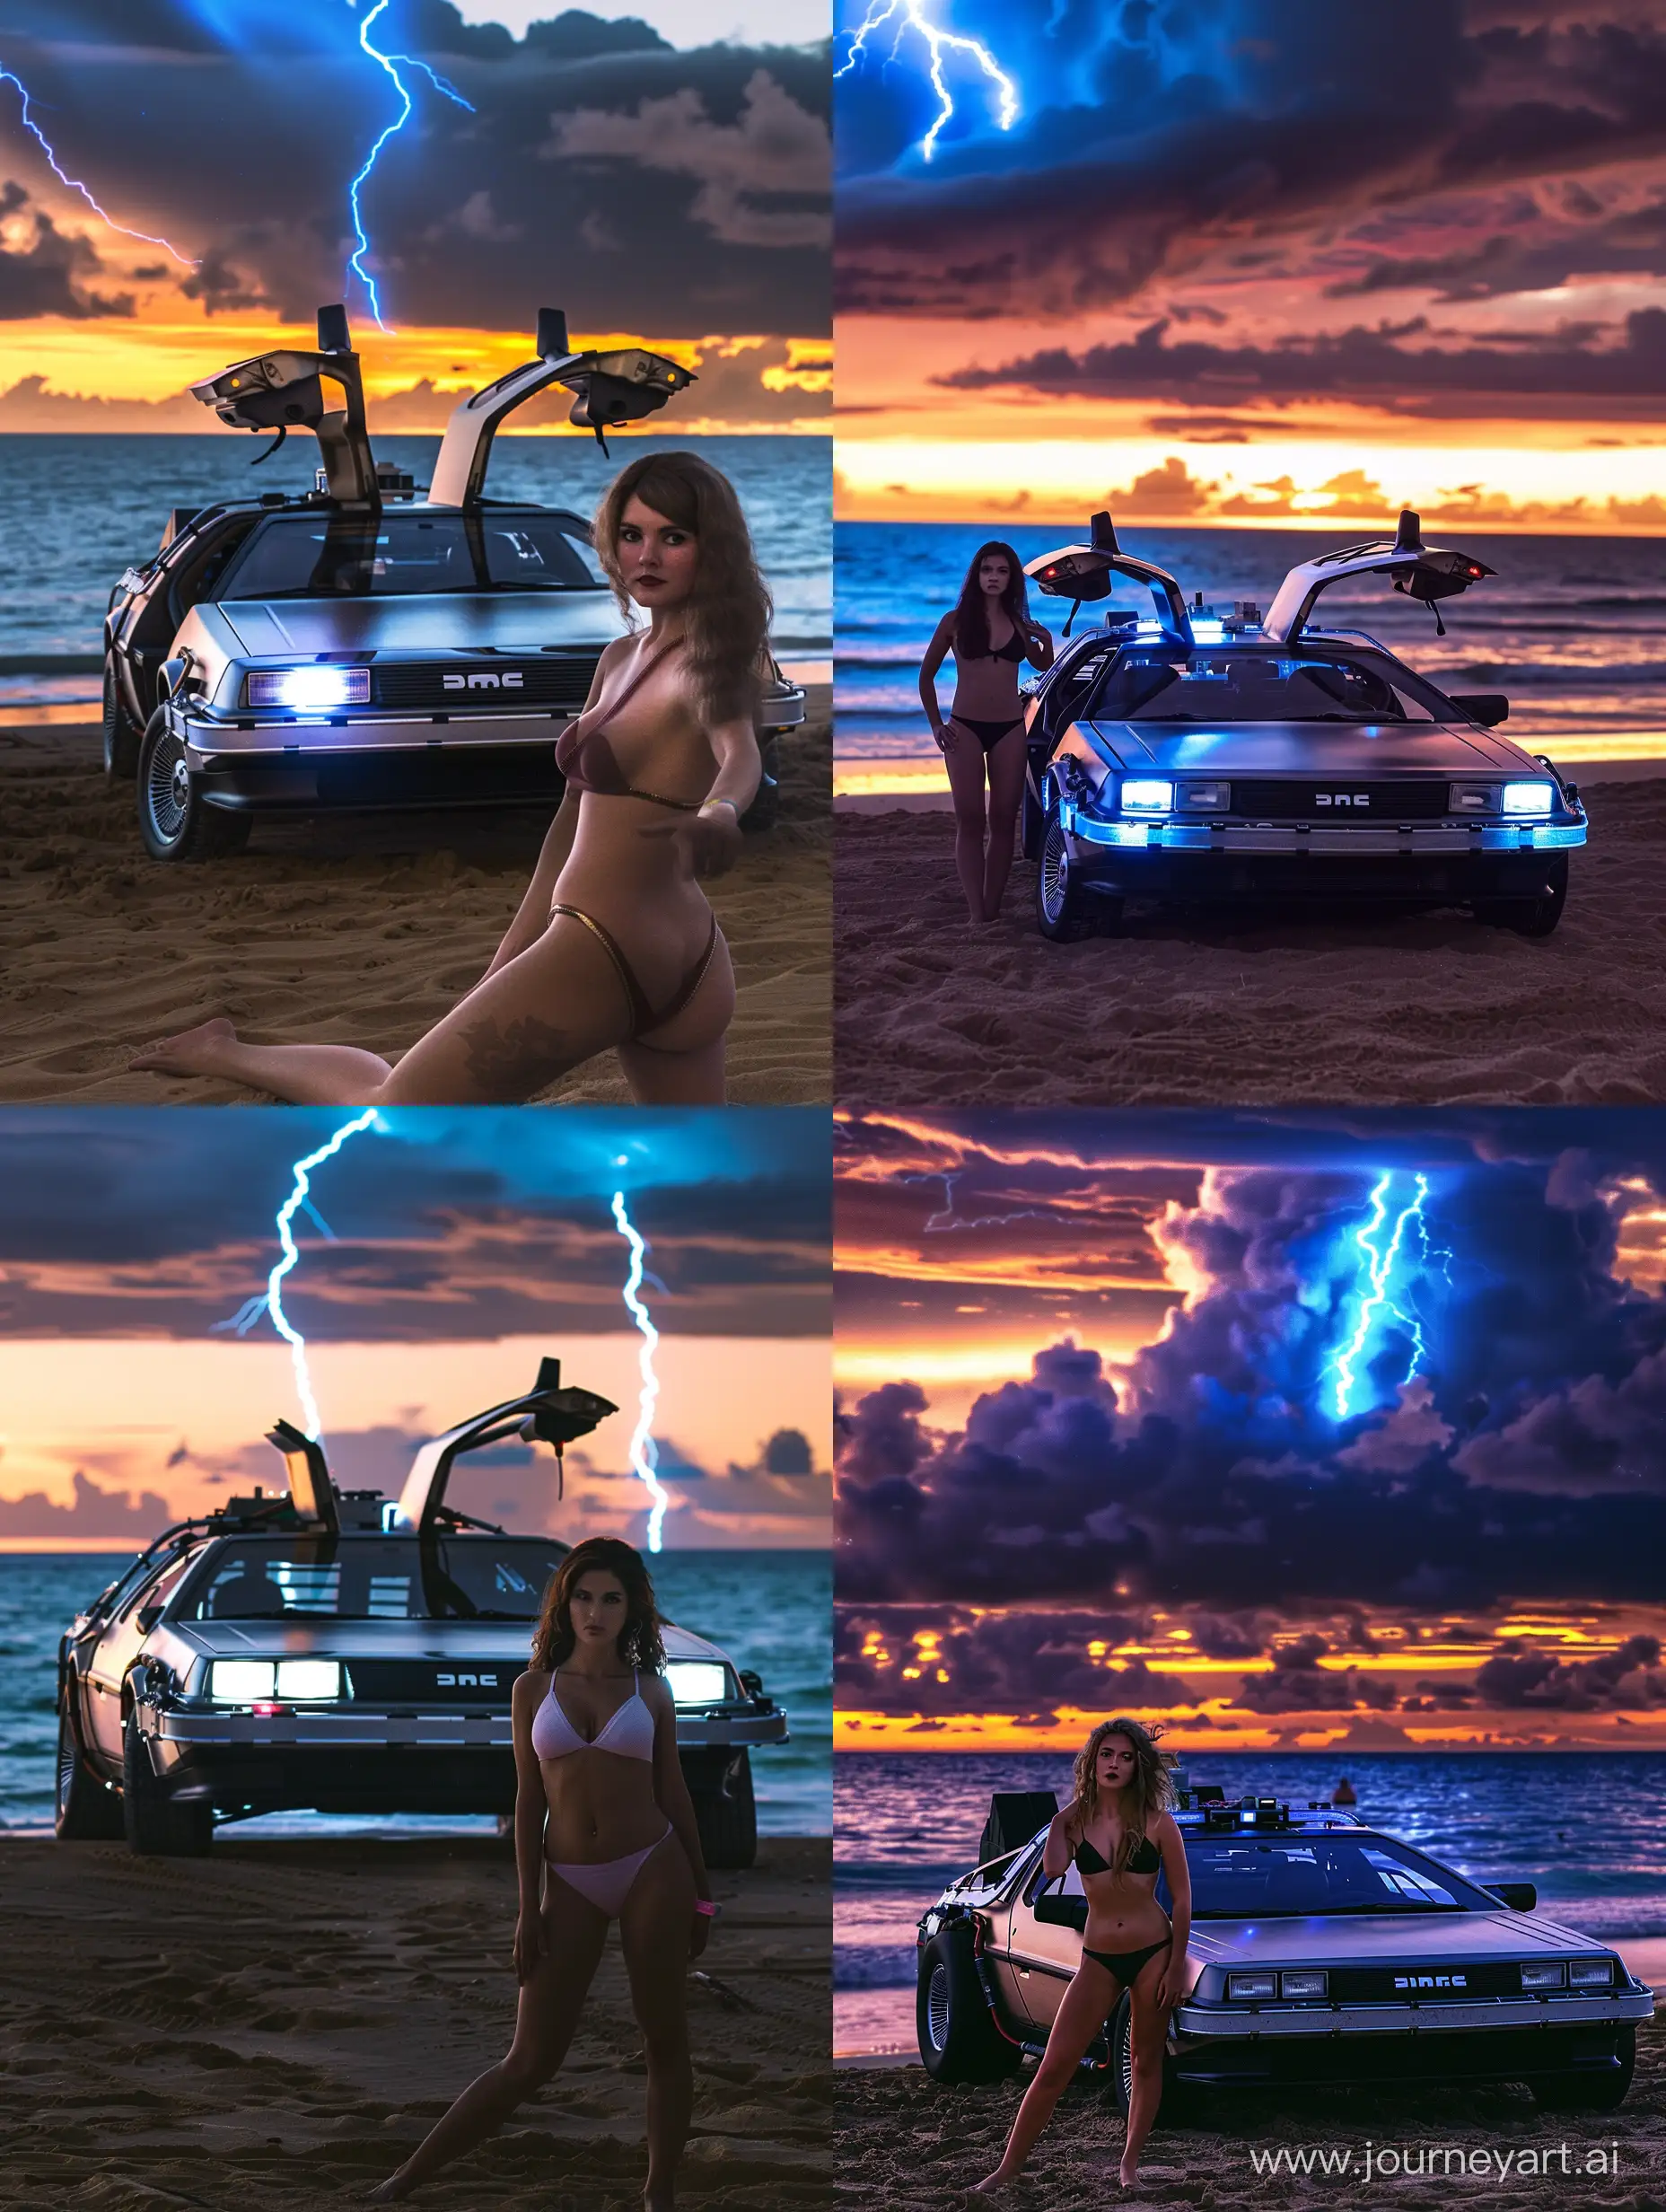 Back to the Future delorean on a beach at sunset. High contrast. Dramatic. Blue lightning in the sky. Hot babe in bikini posing in foreground.